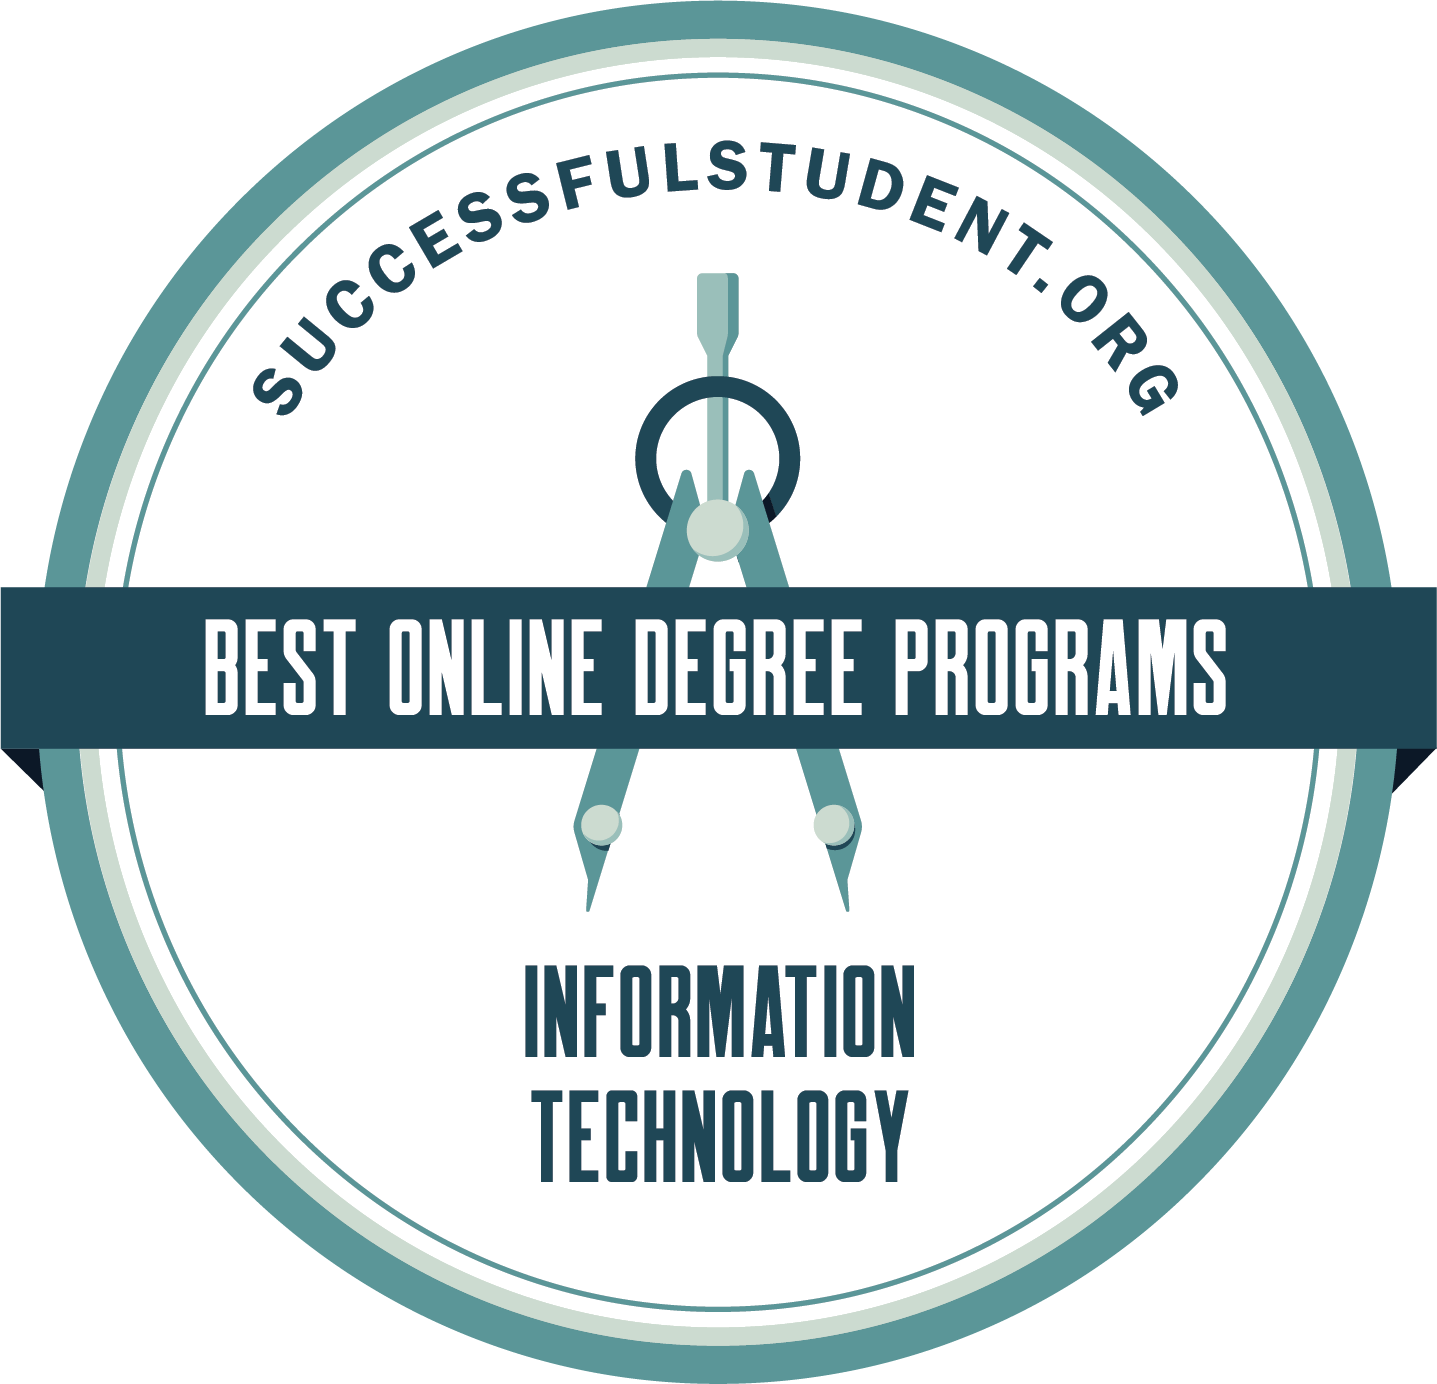 The Best Online Master’s in Information Technology's Badge